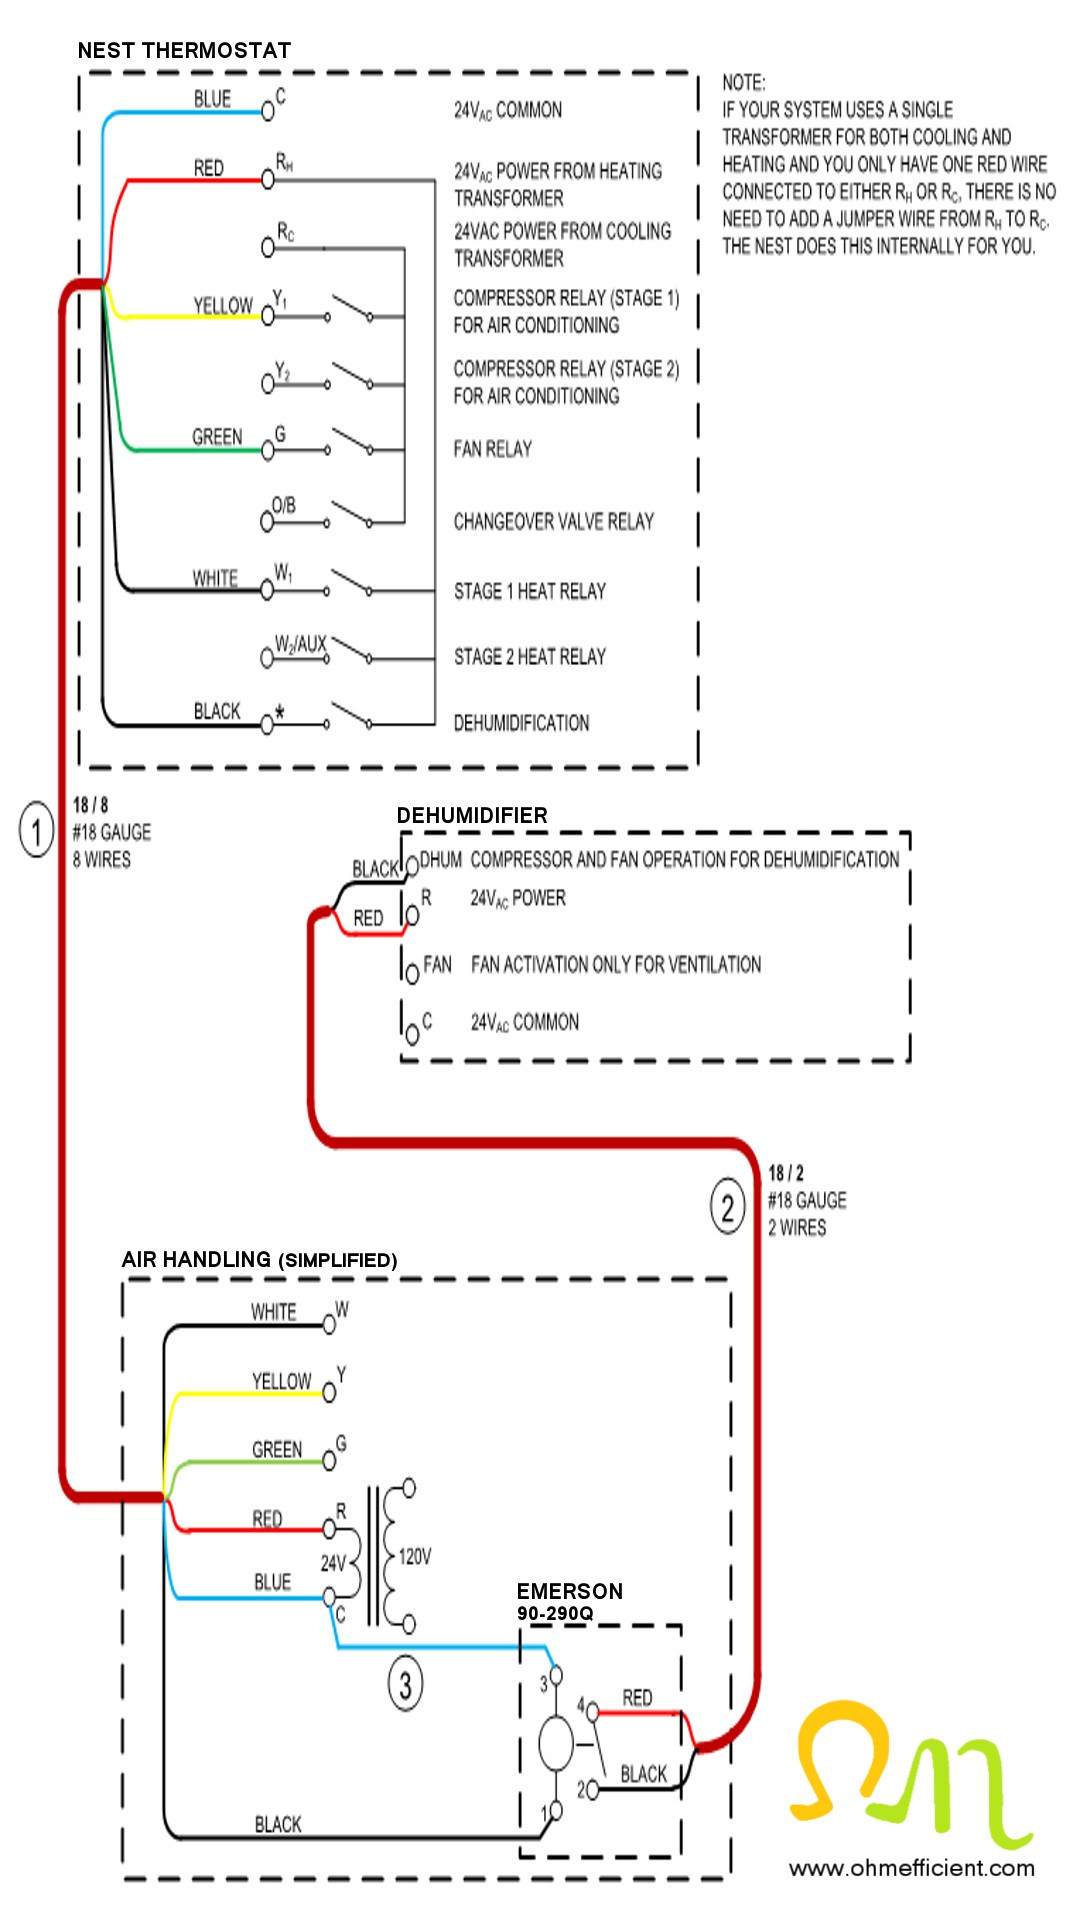 Nest Humidifier Wiring Diagram from ohmefficient.com